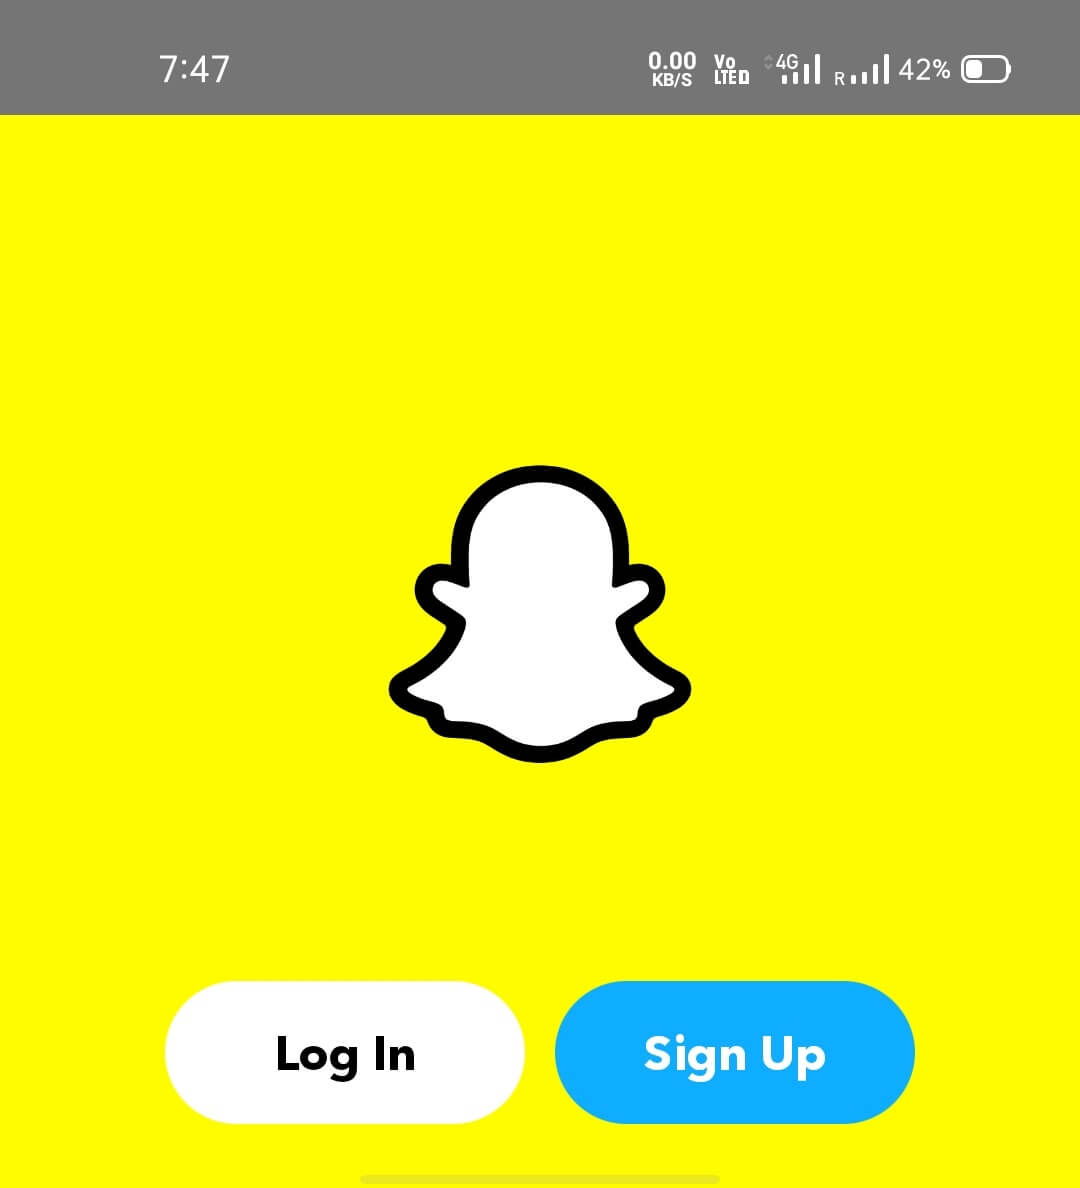 Now open the Snapchat clone application and complete the login or signup process